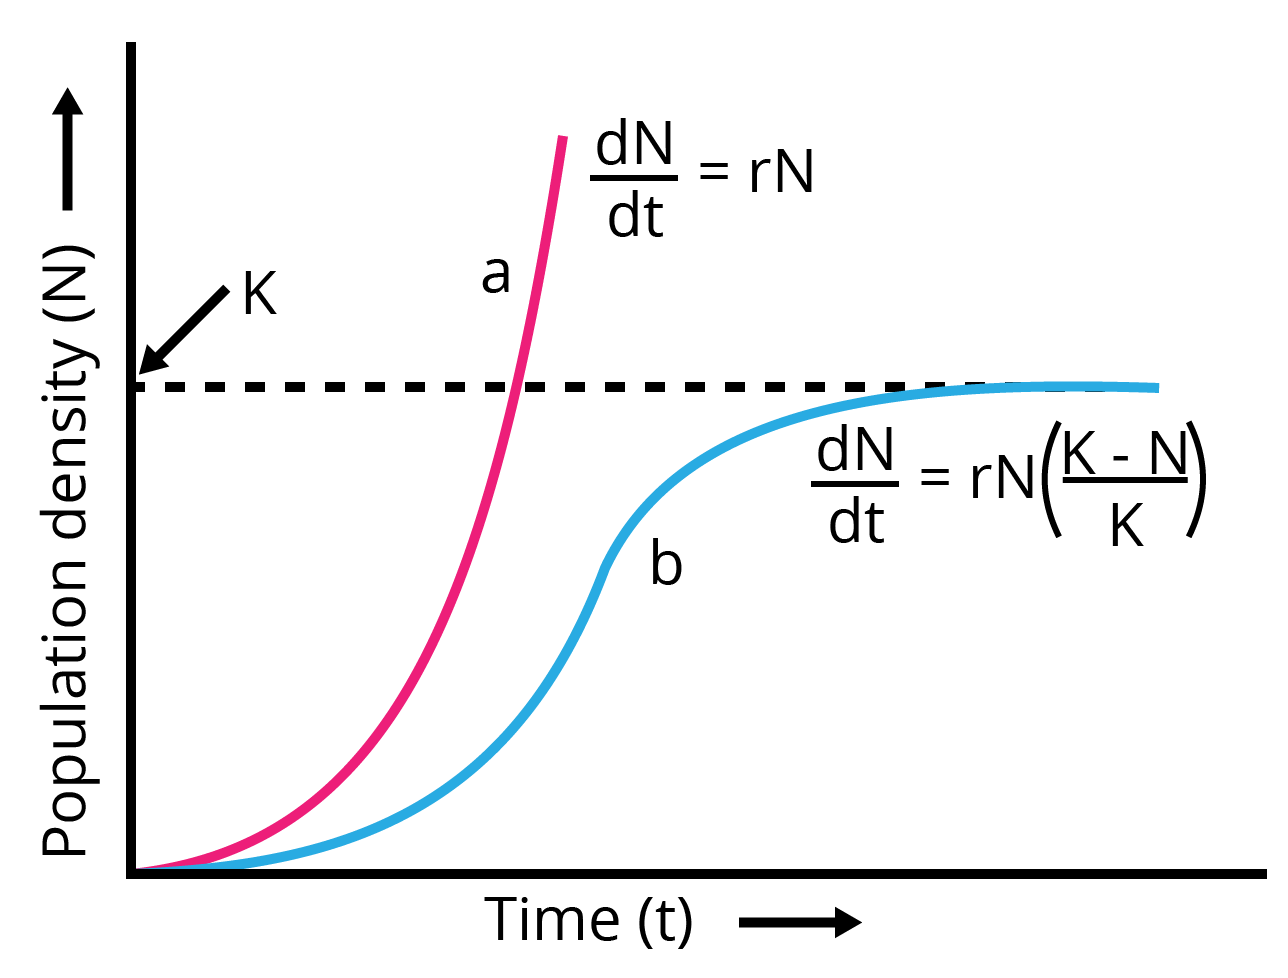 Sigmoid growth curve for Logistic growth model